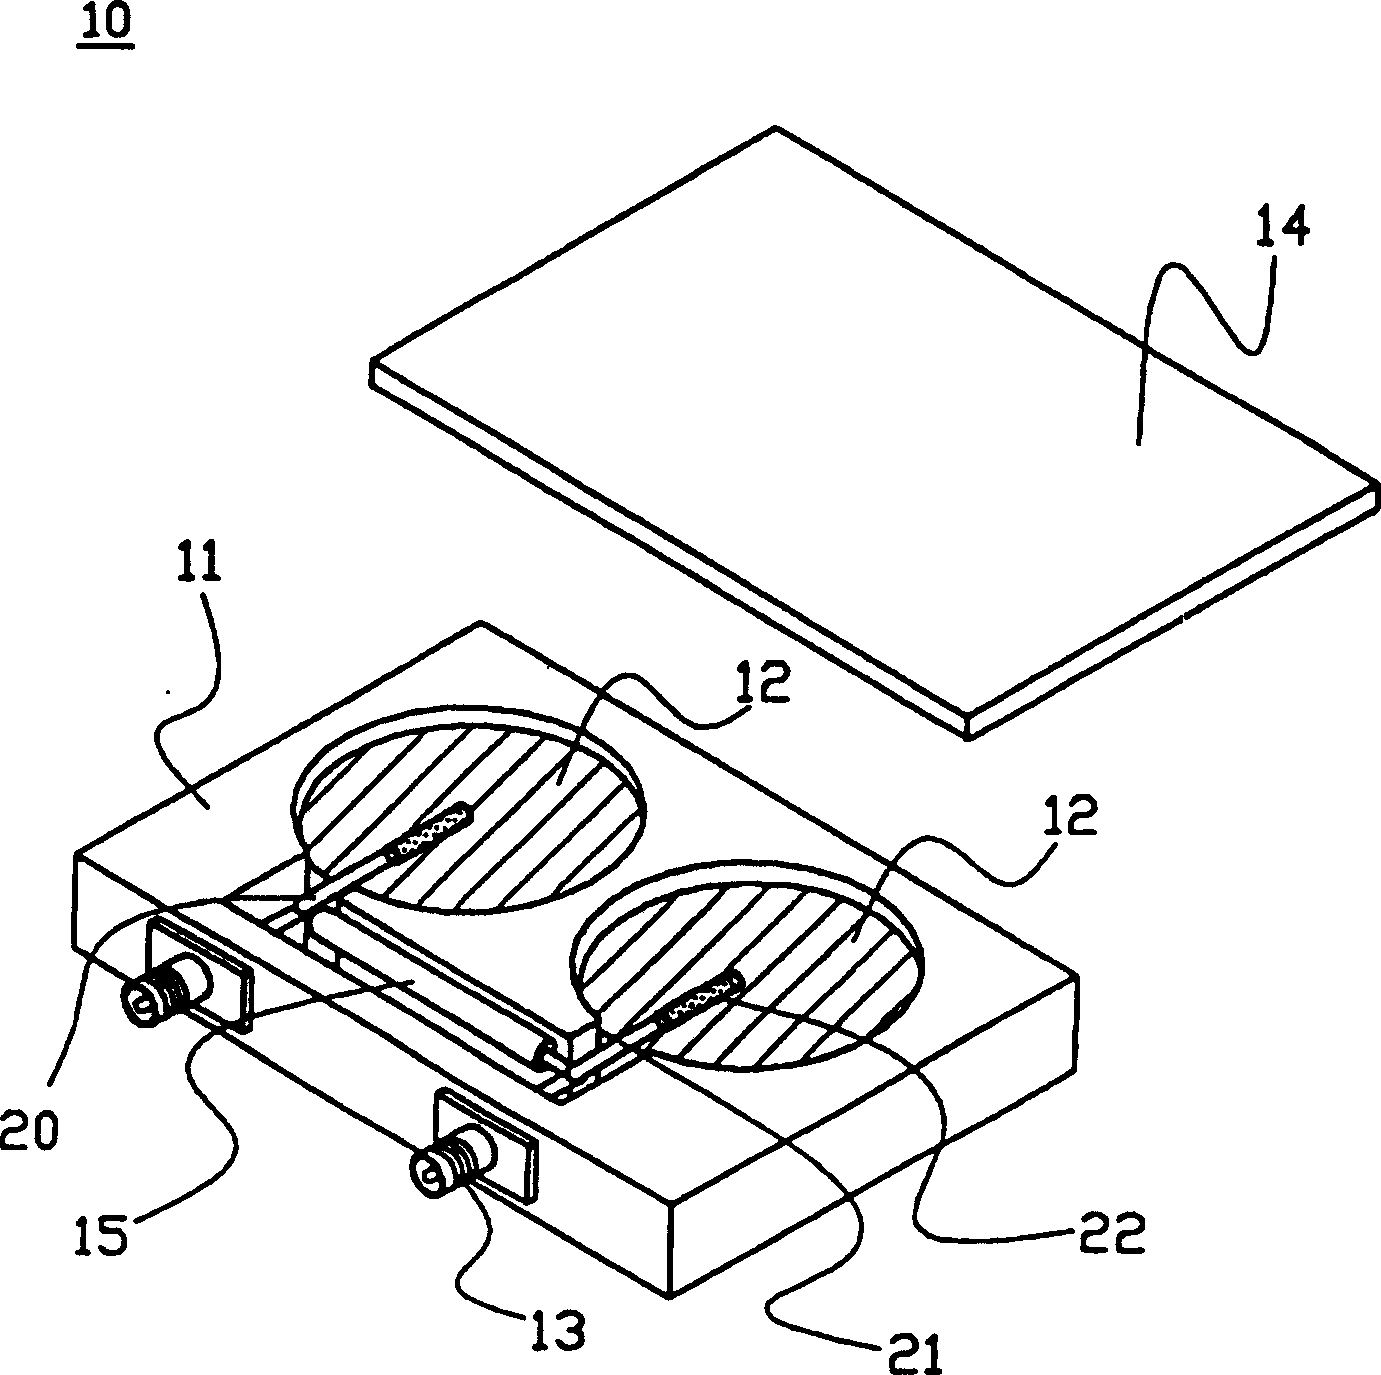 Dielectric filter and dielectric duplexer